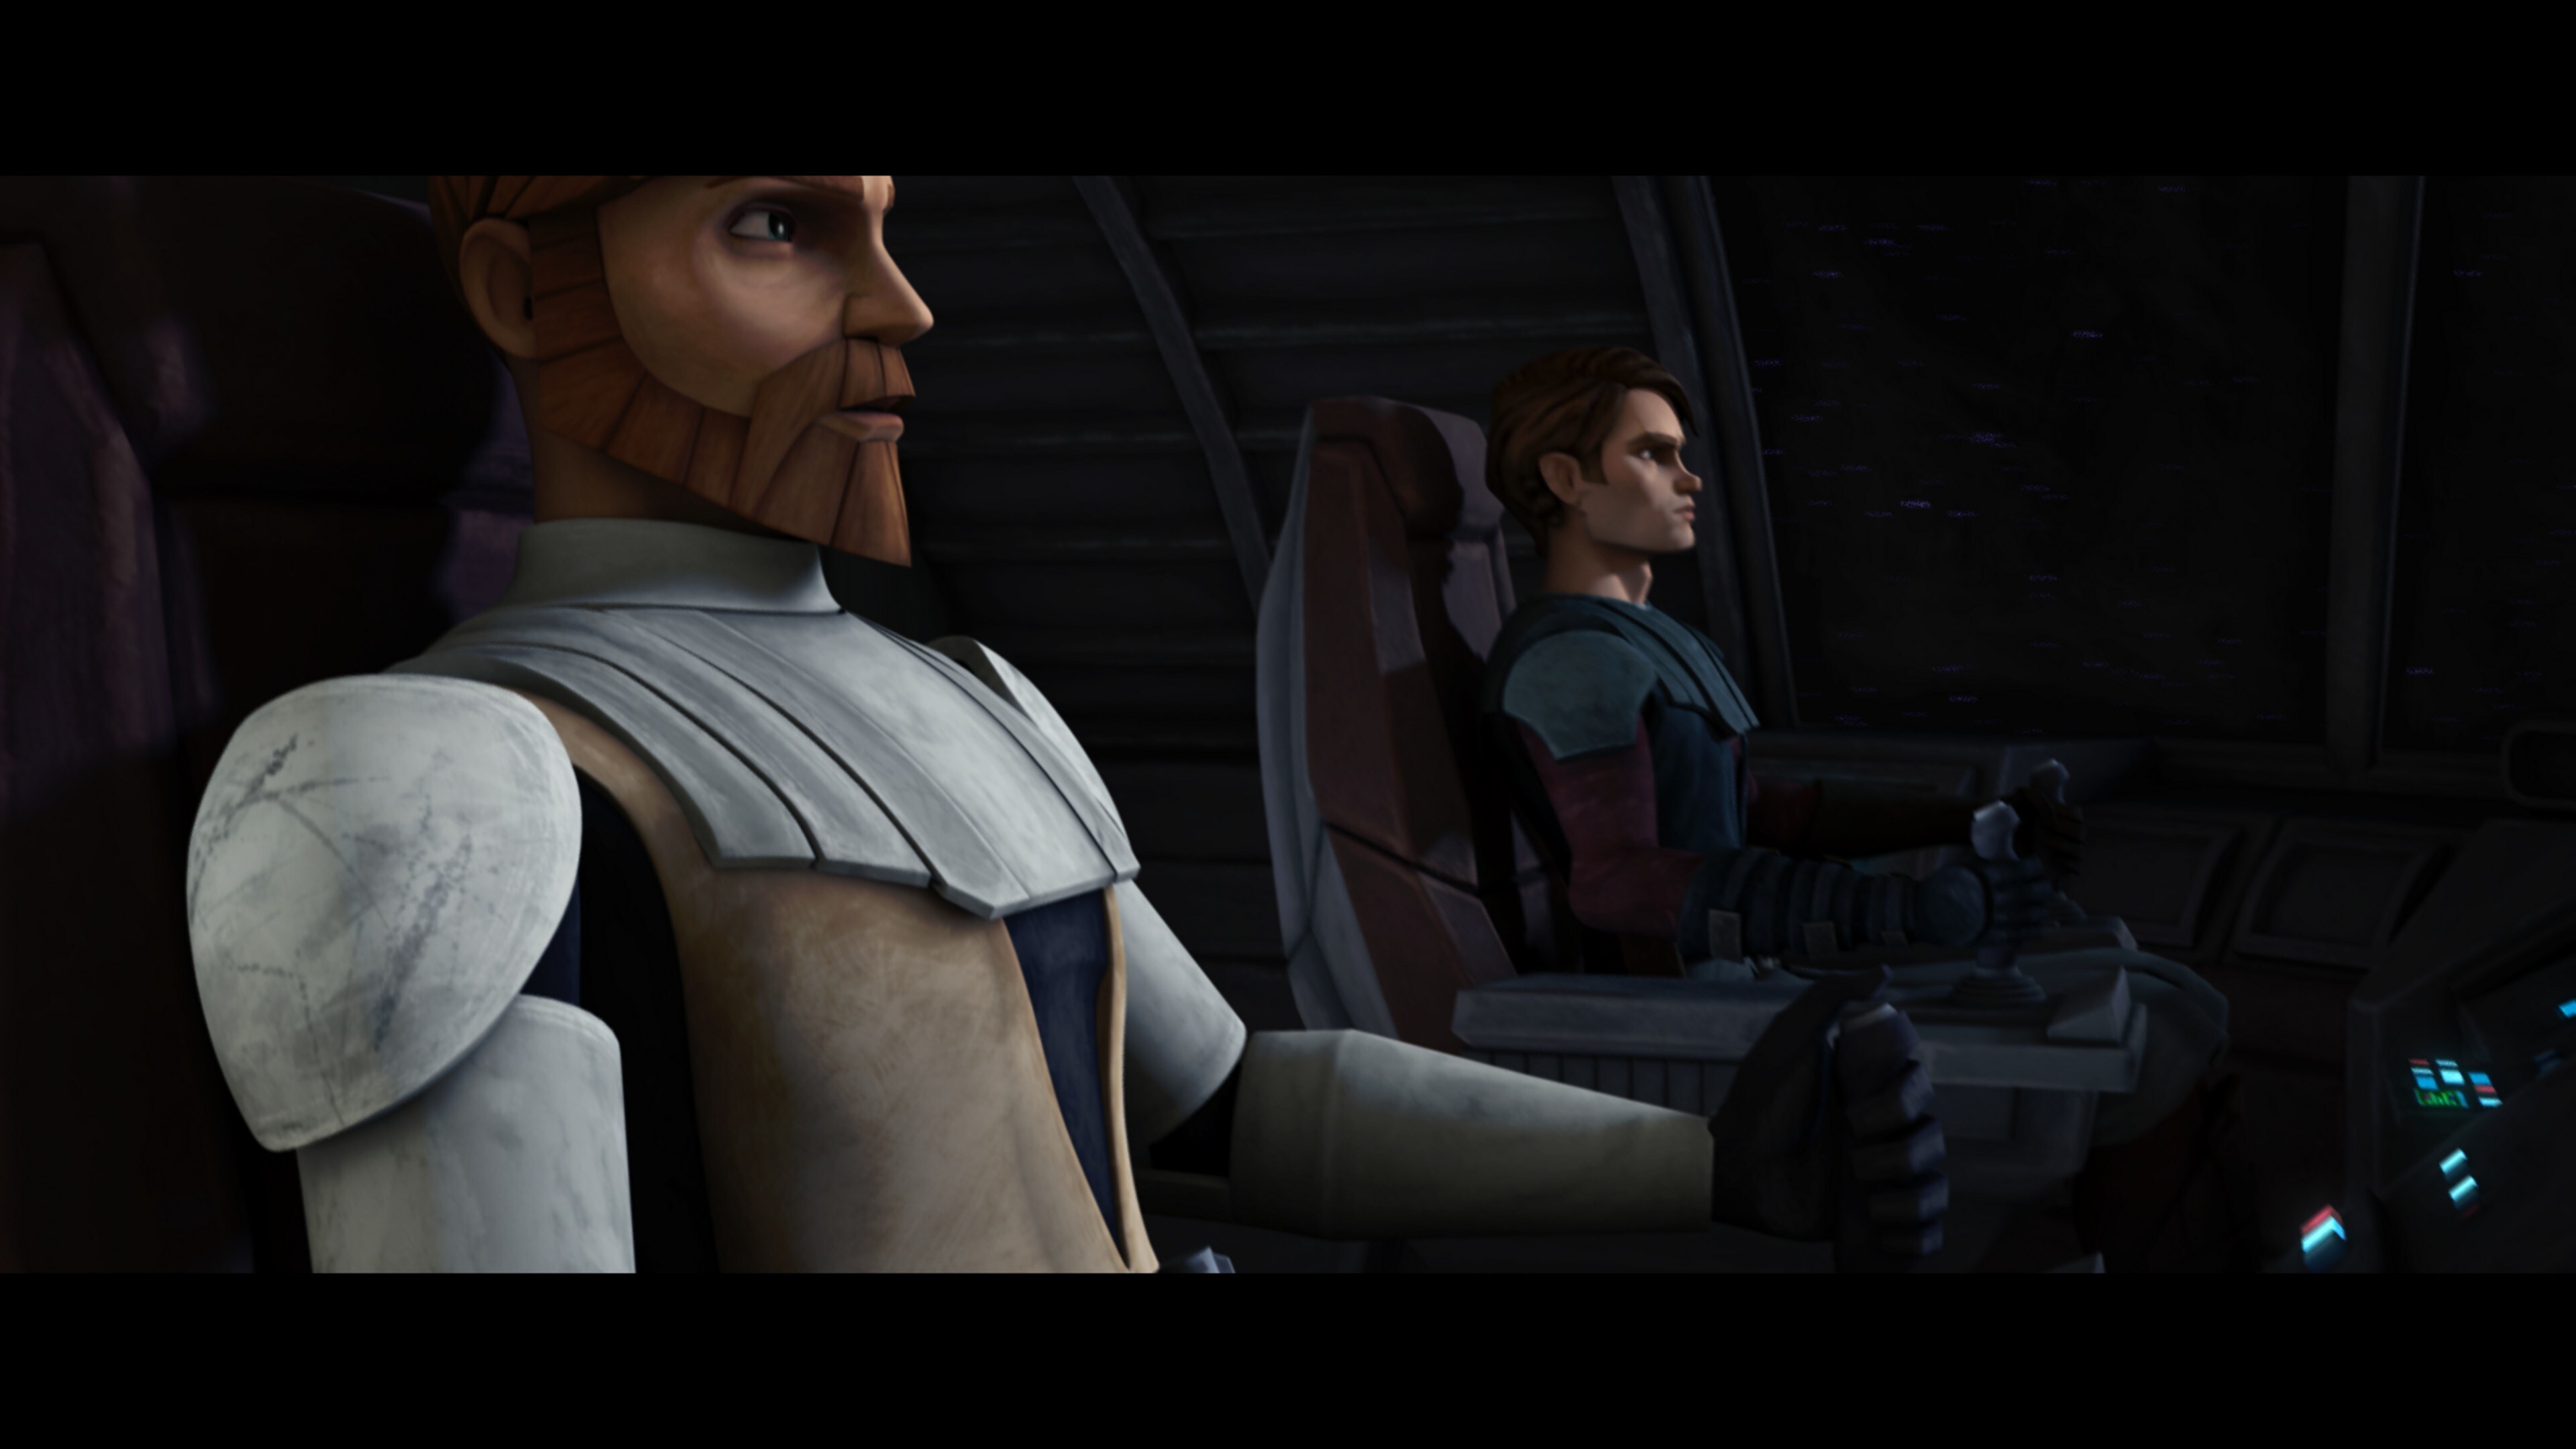 Kenobi's discomfort and inexperience with space travel is evident as he doesn't recognize the cap...